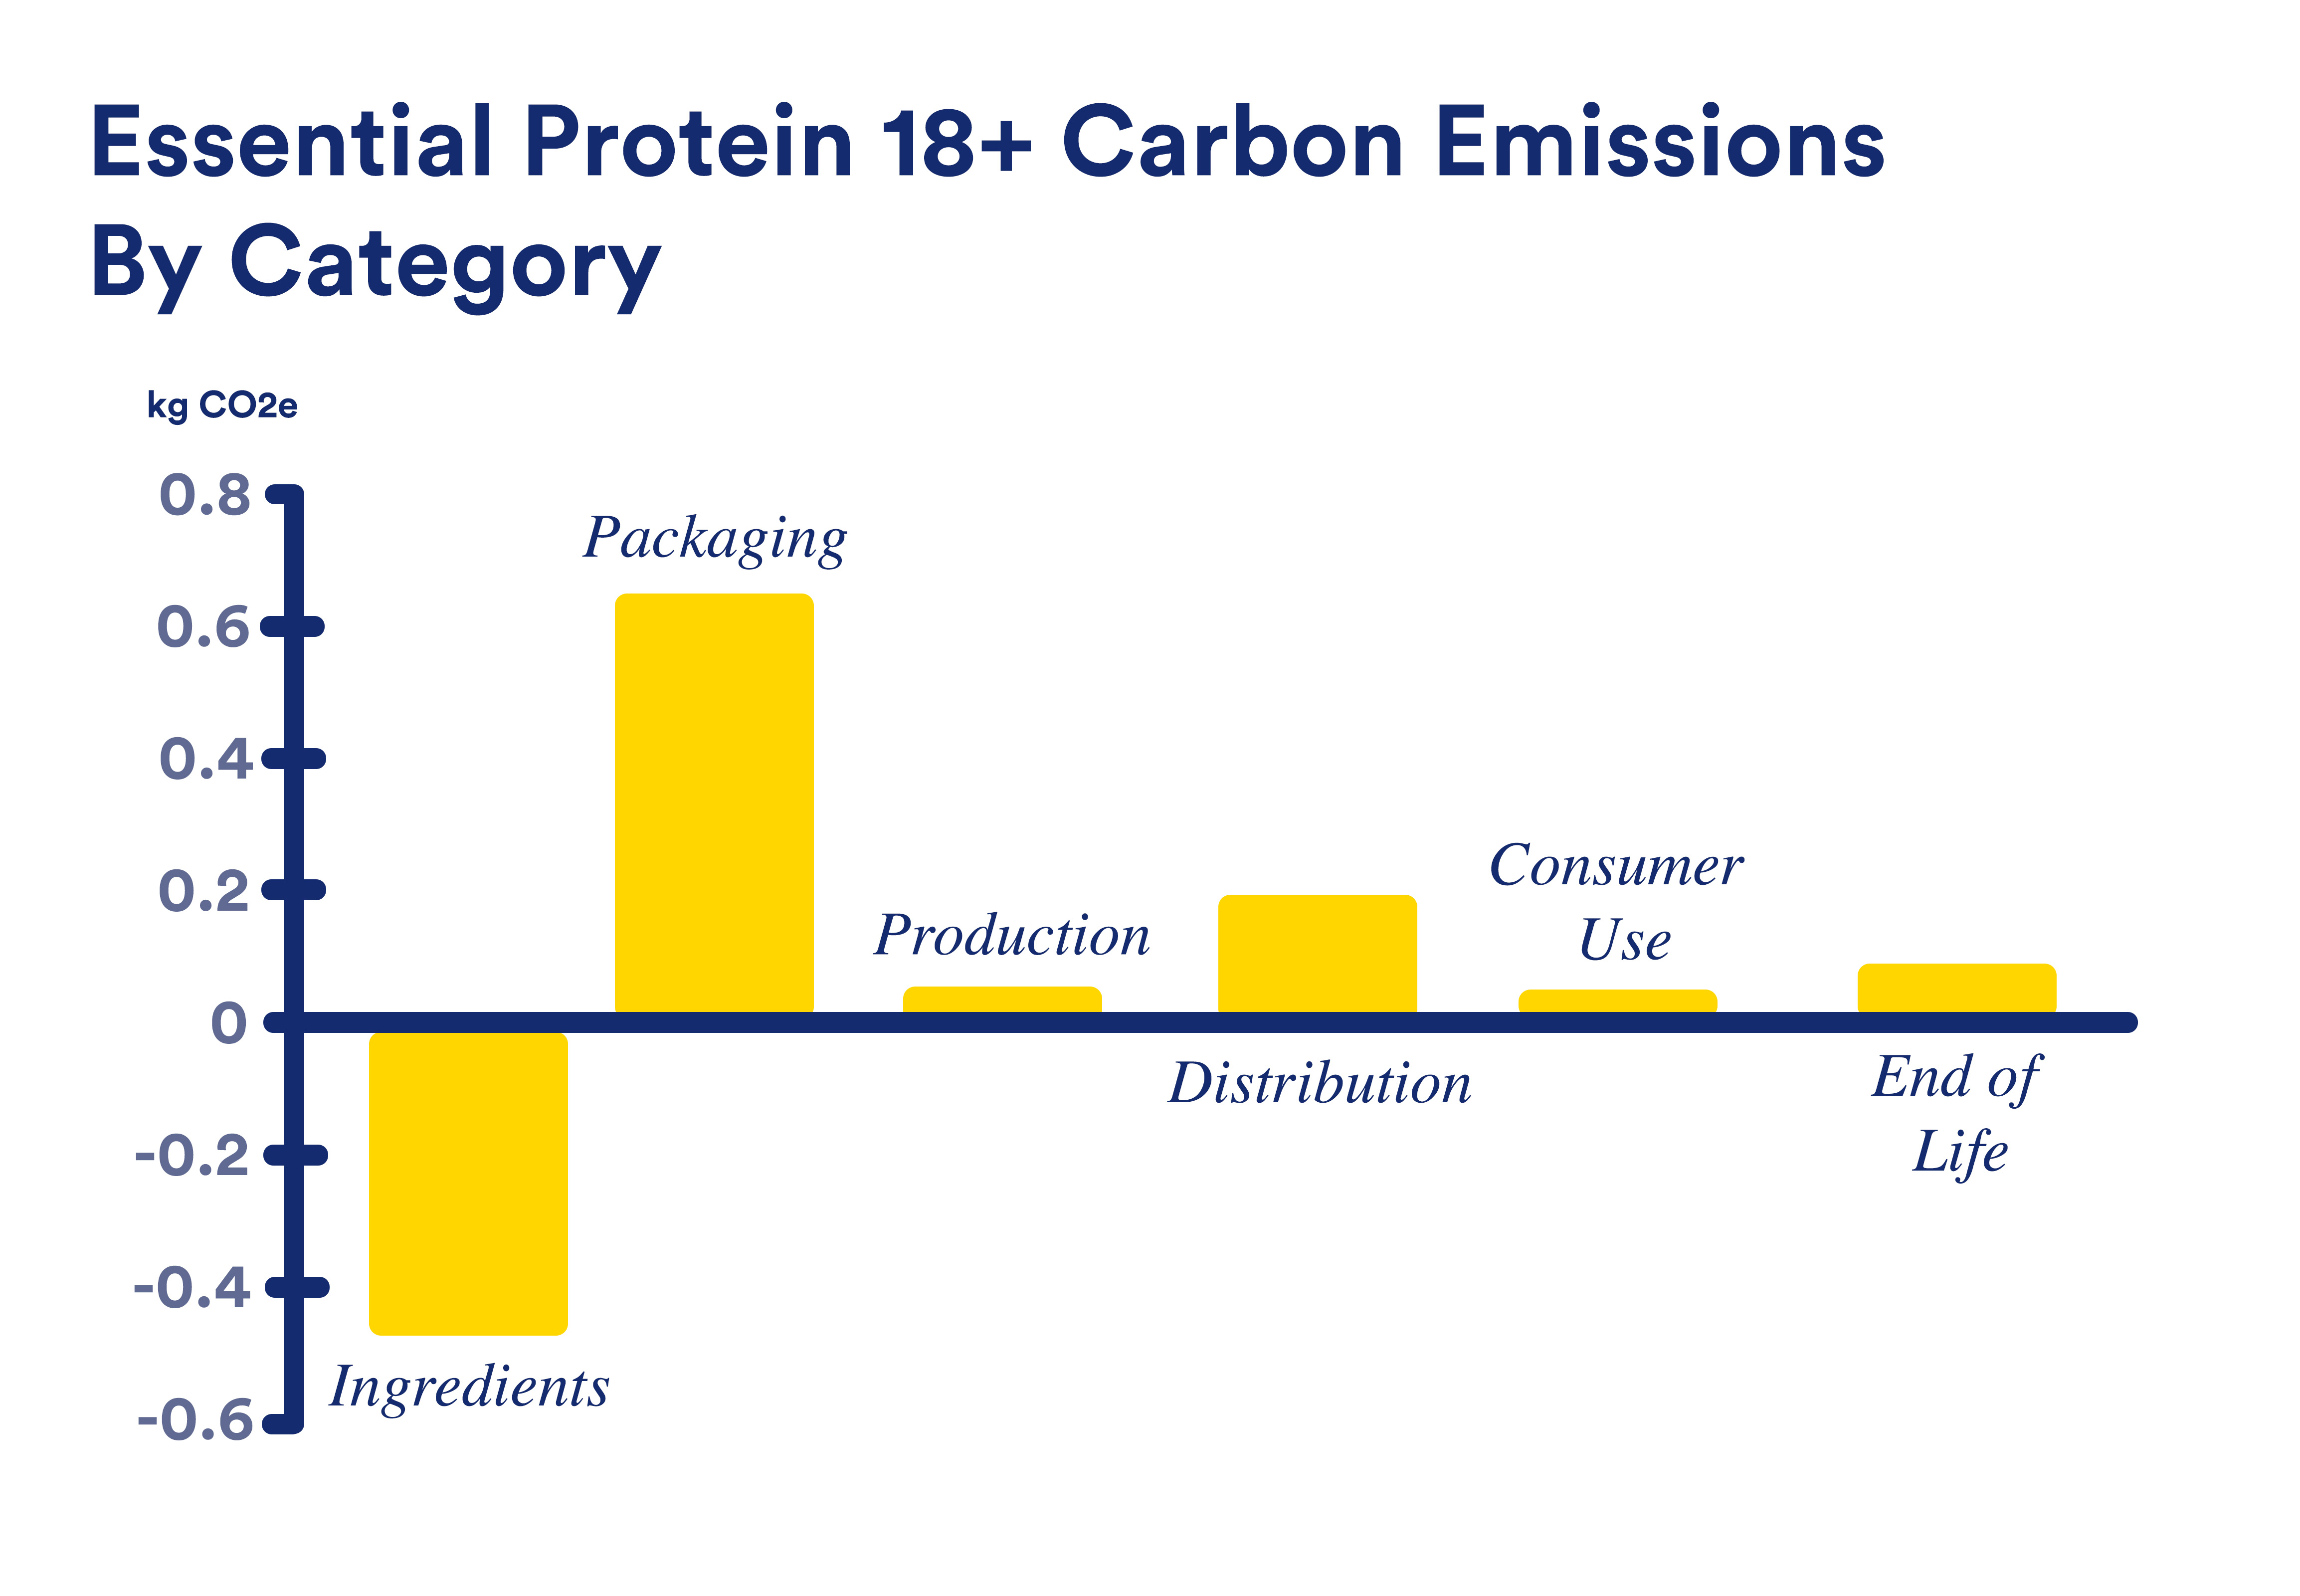 Essential Protein Carbon by Category